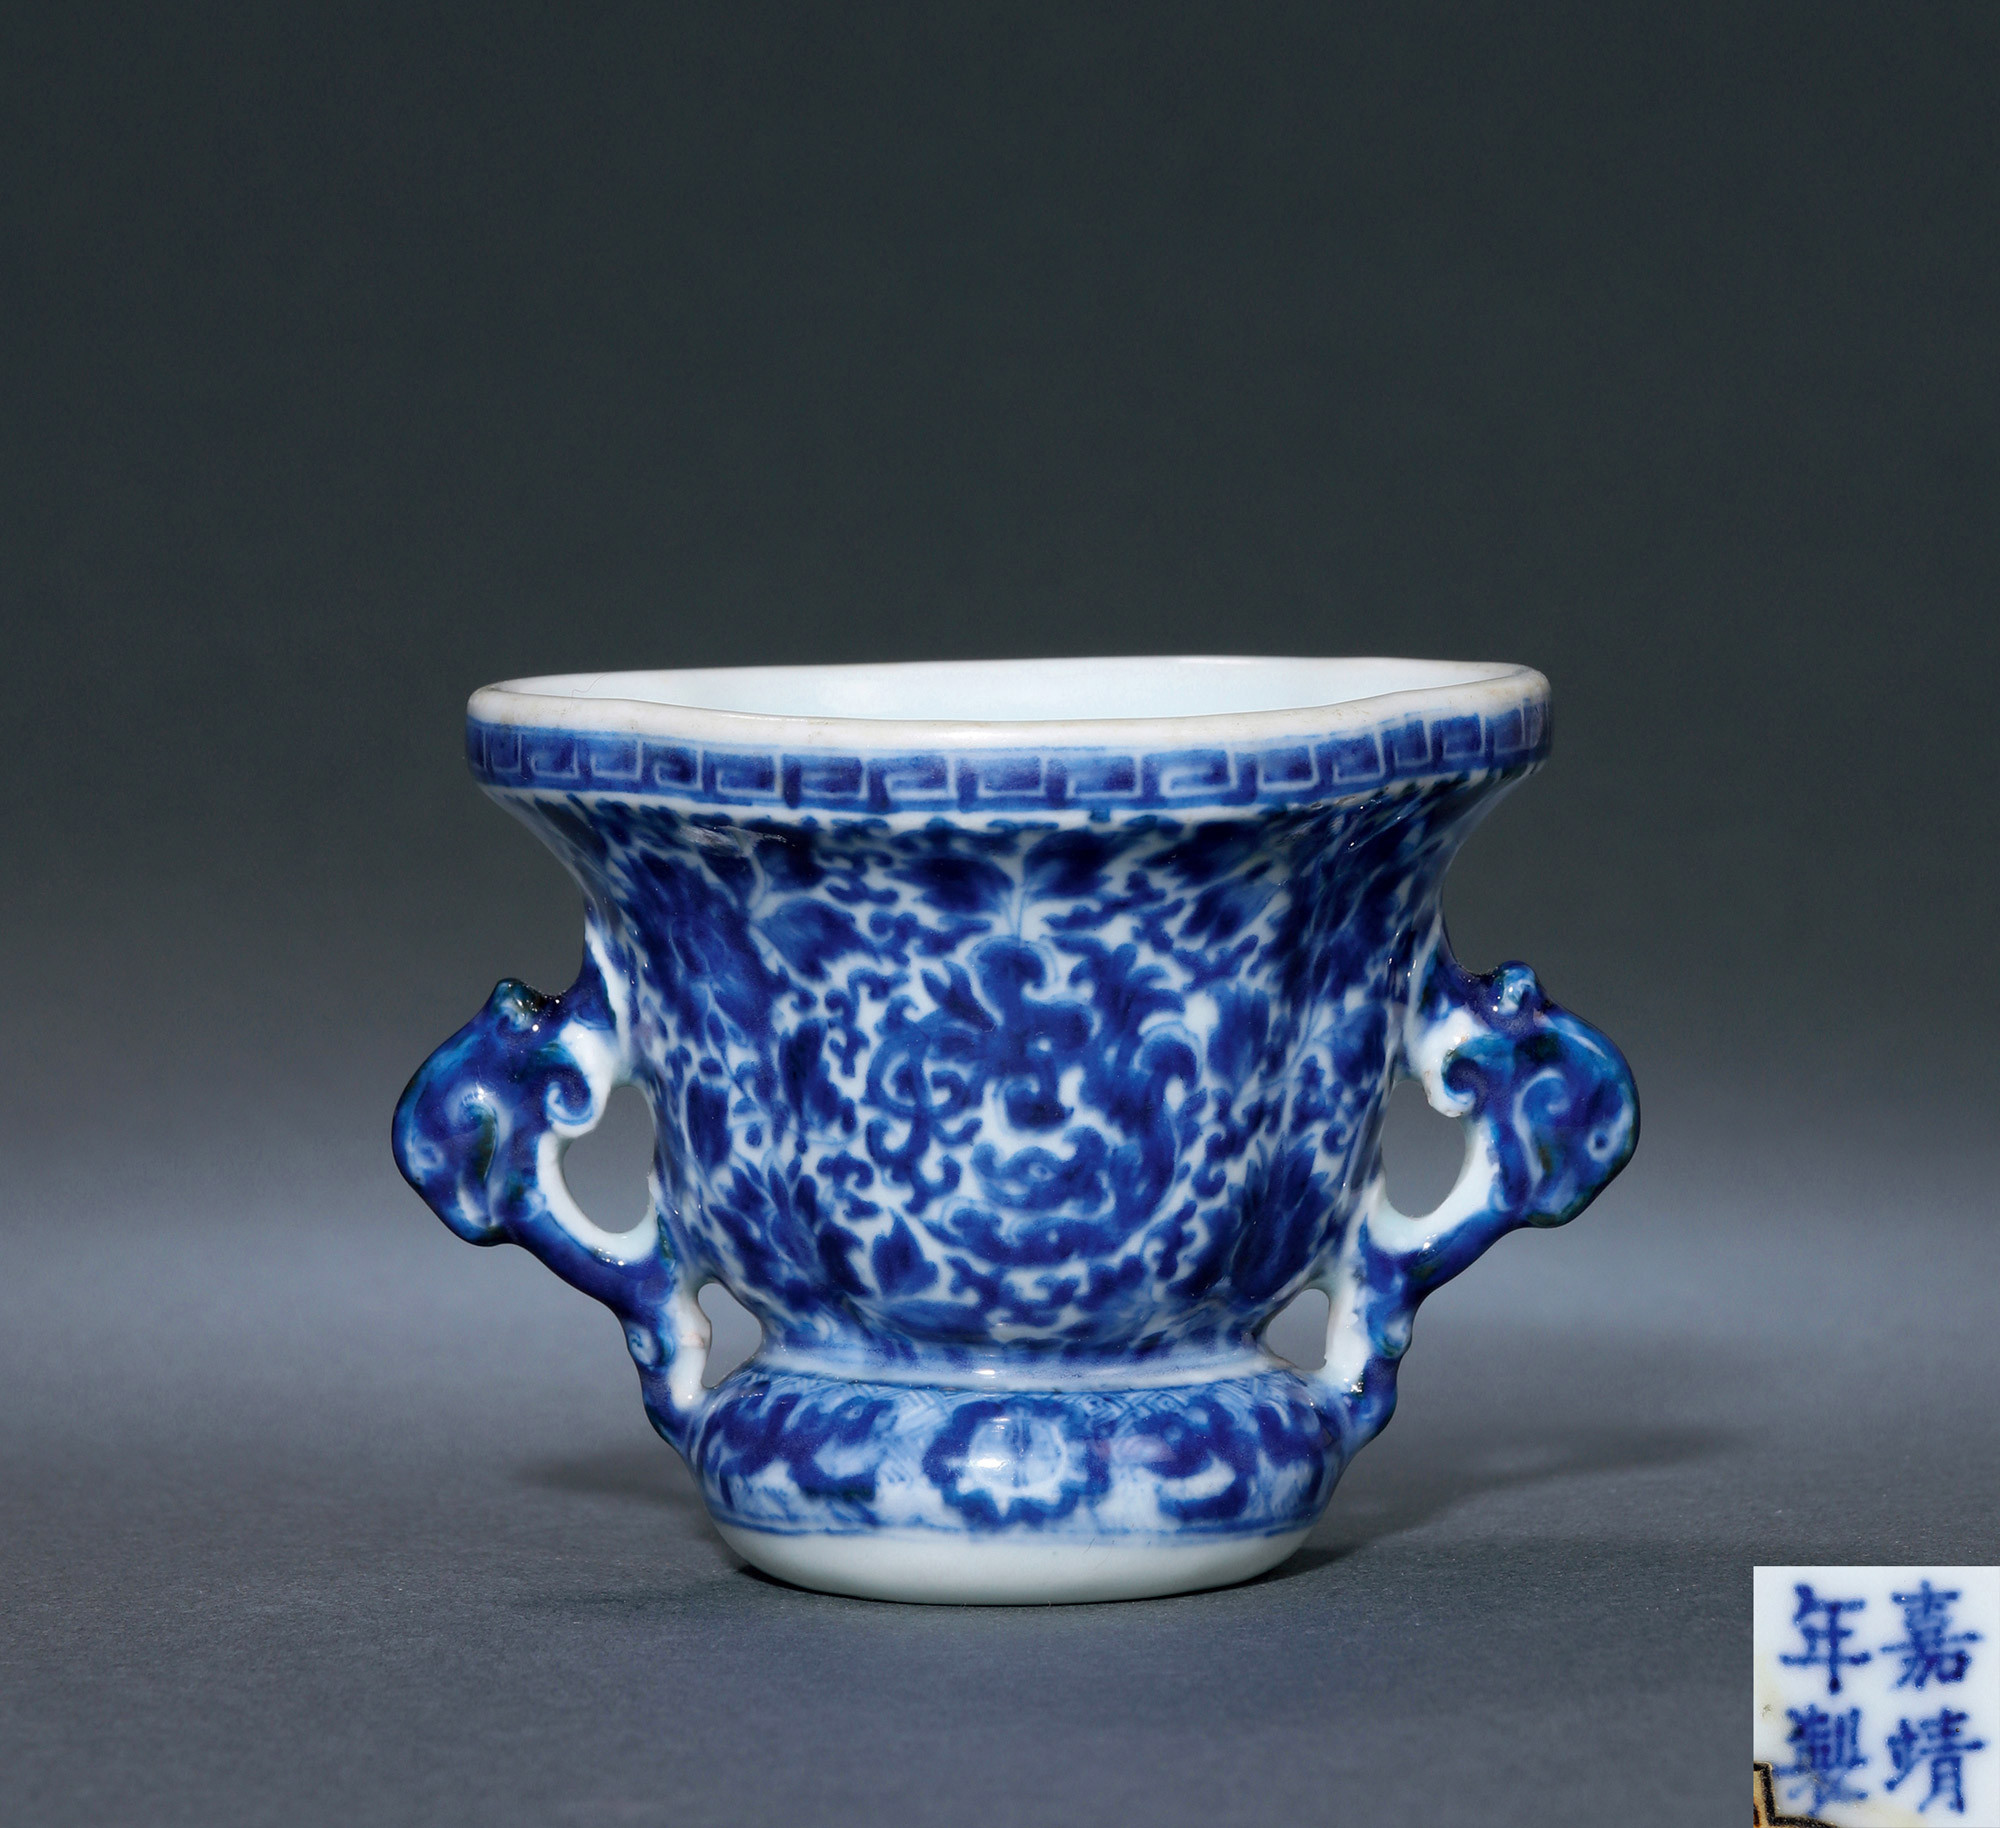 A BEGONIA-SHAPED BLUE AND WHITE CUP WITH‘DRAGON AND FLORAL’ DESIGN AND PHOENIX HANDLES